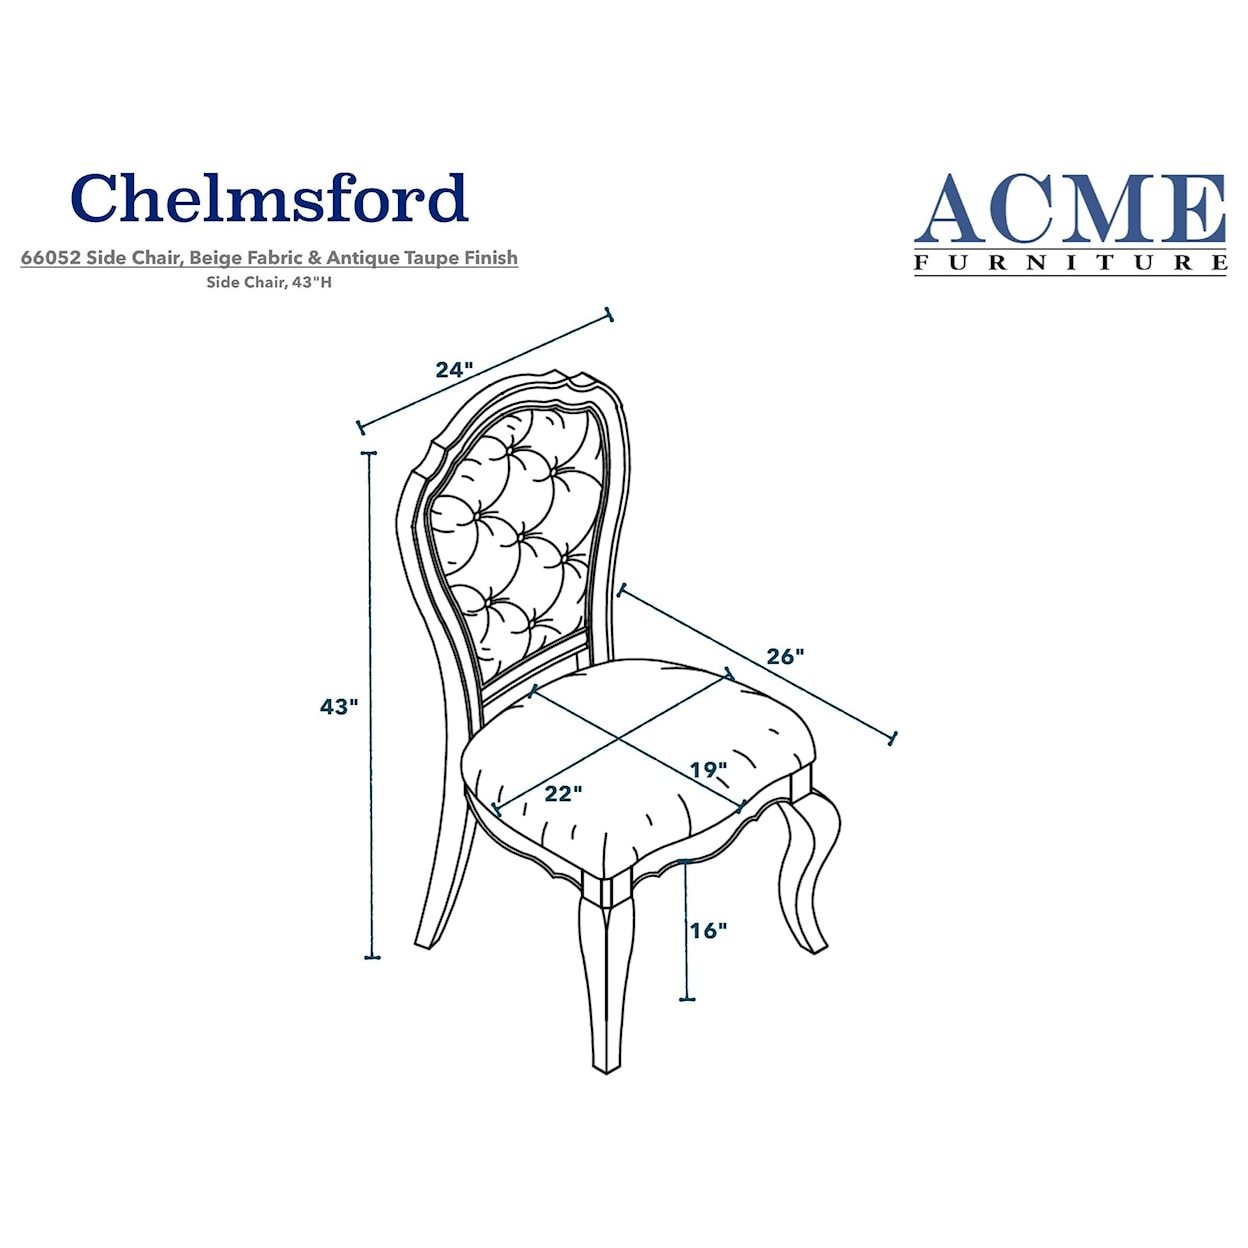 Acme Furniture Chelmsford Side Chair 